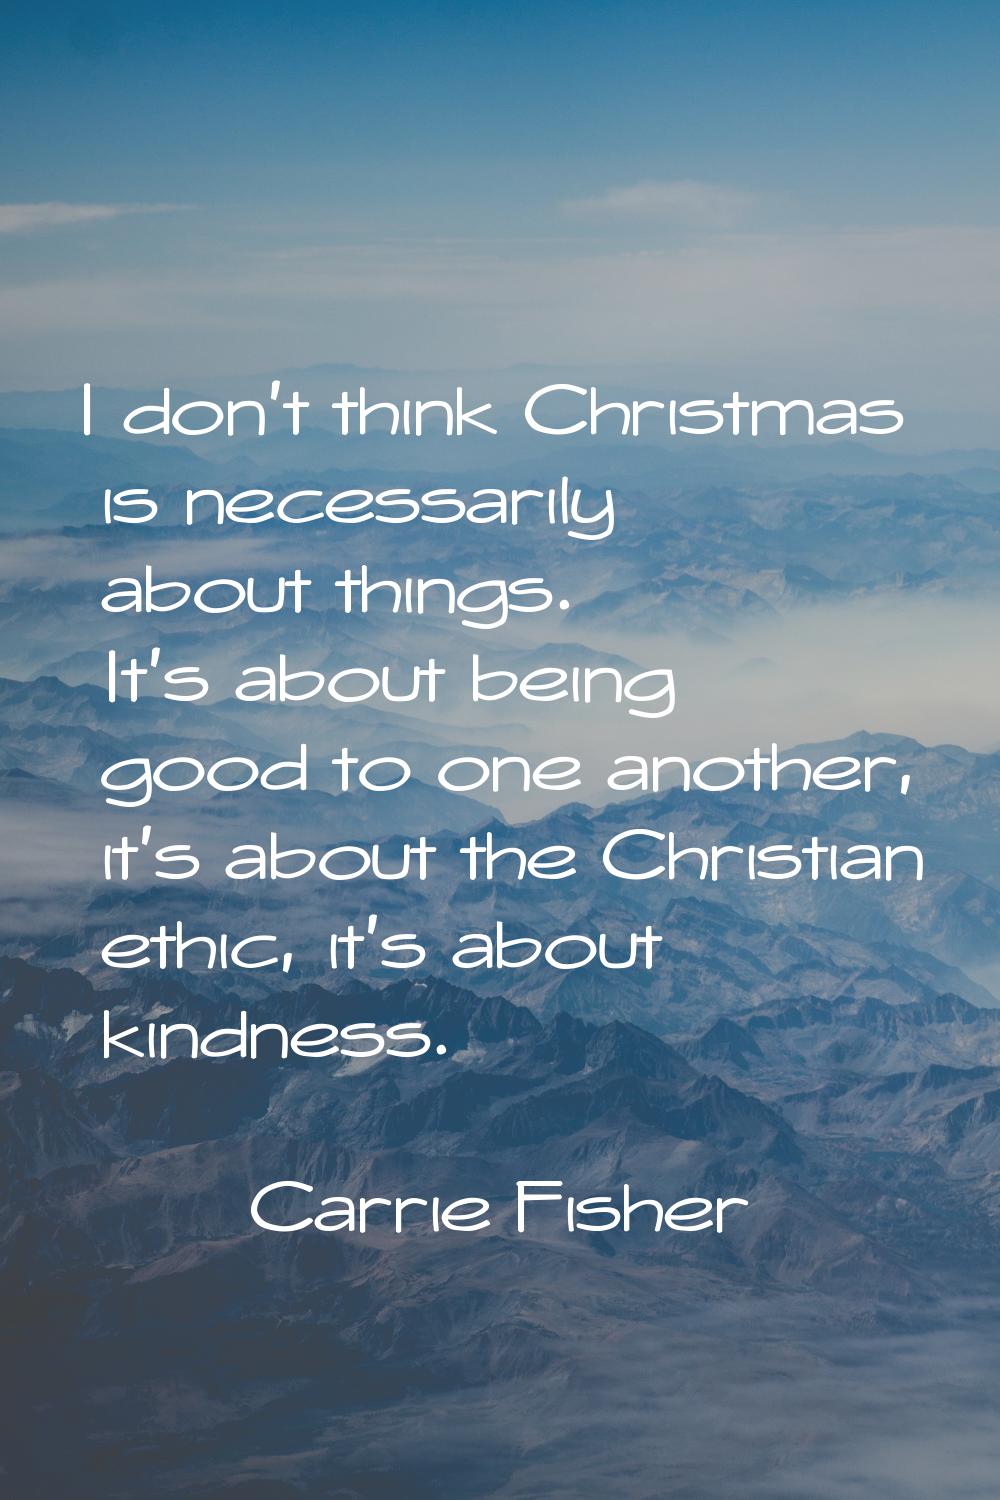 I don't think Christmas is necessarily about things. It's about being good to one another, it's abo